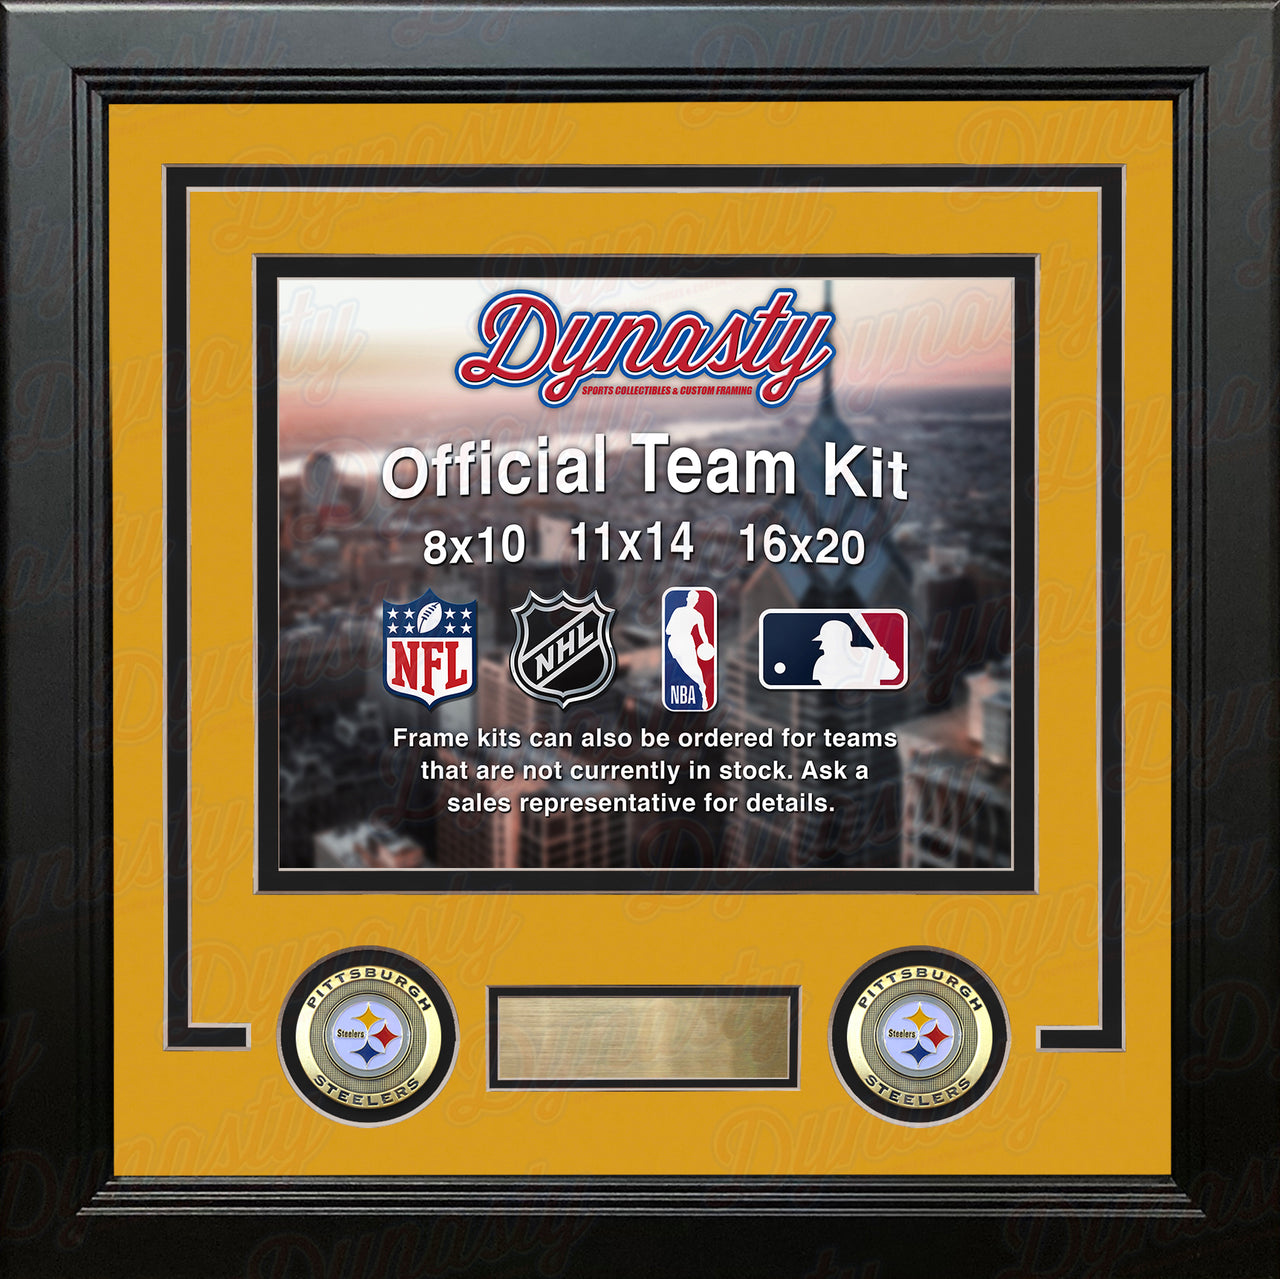 NFL Football Photo Picture Frame Kit - Pittsburgh Steelers (Yellow Matting, Black Trim) - Dynasty Sports & Framing 